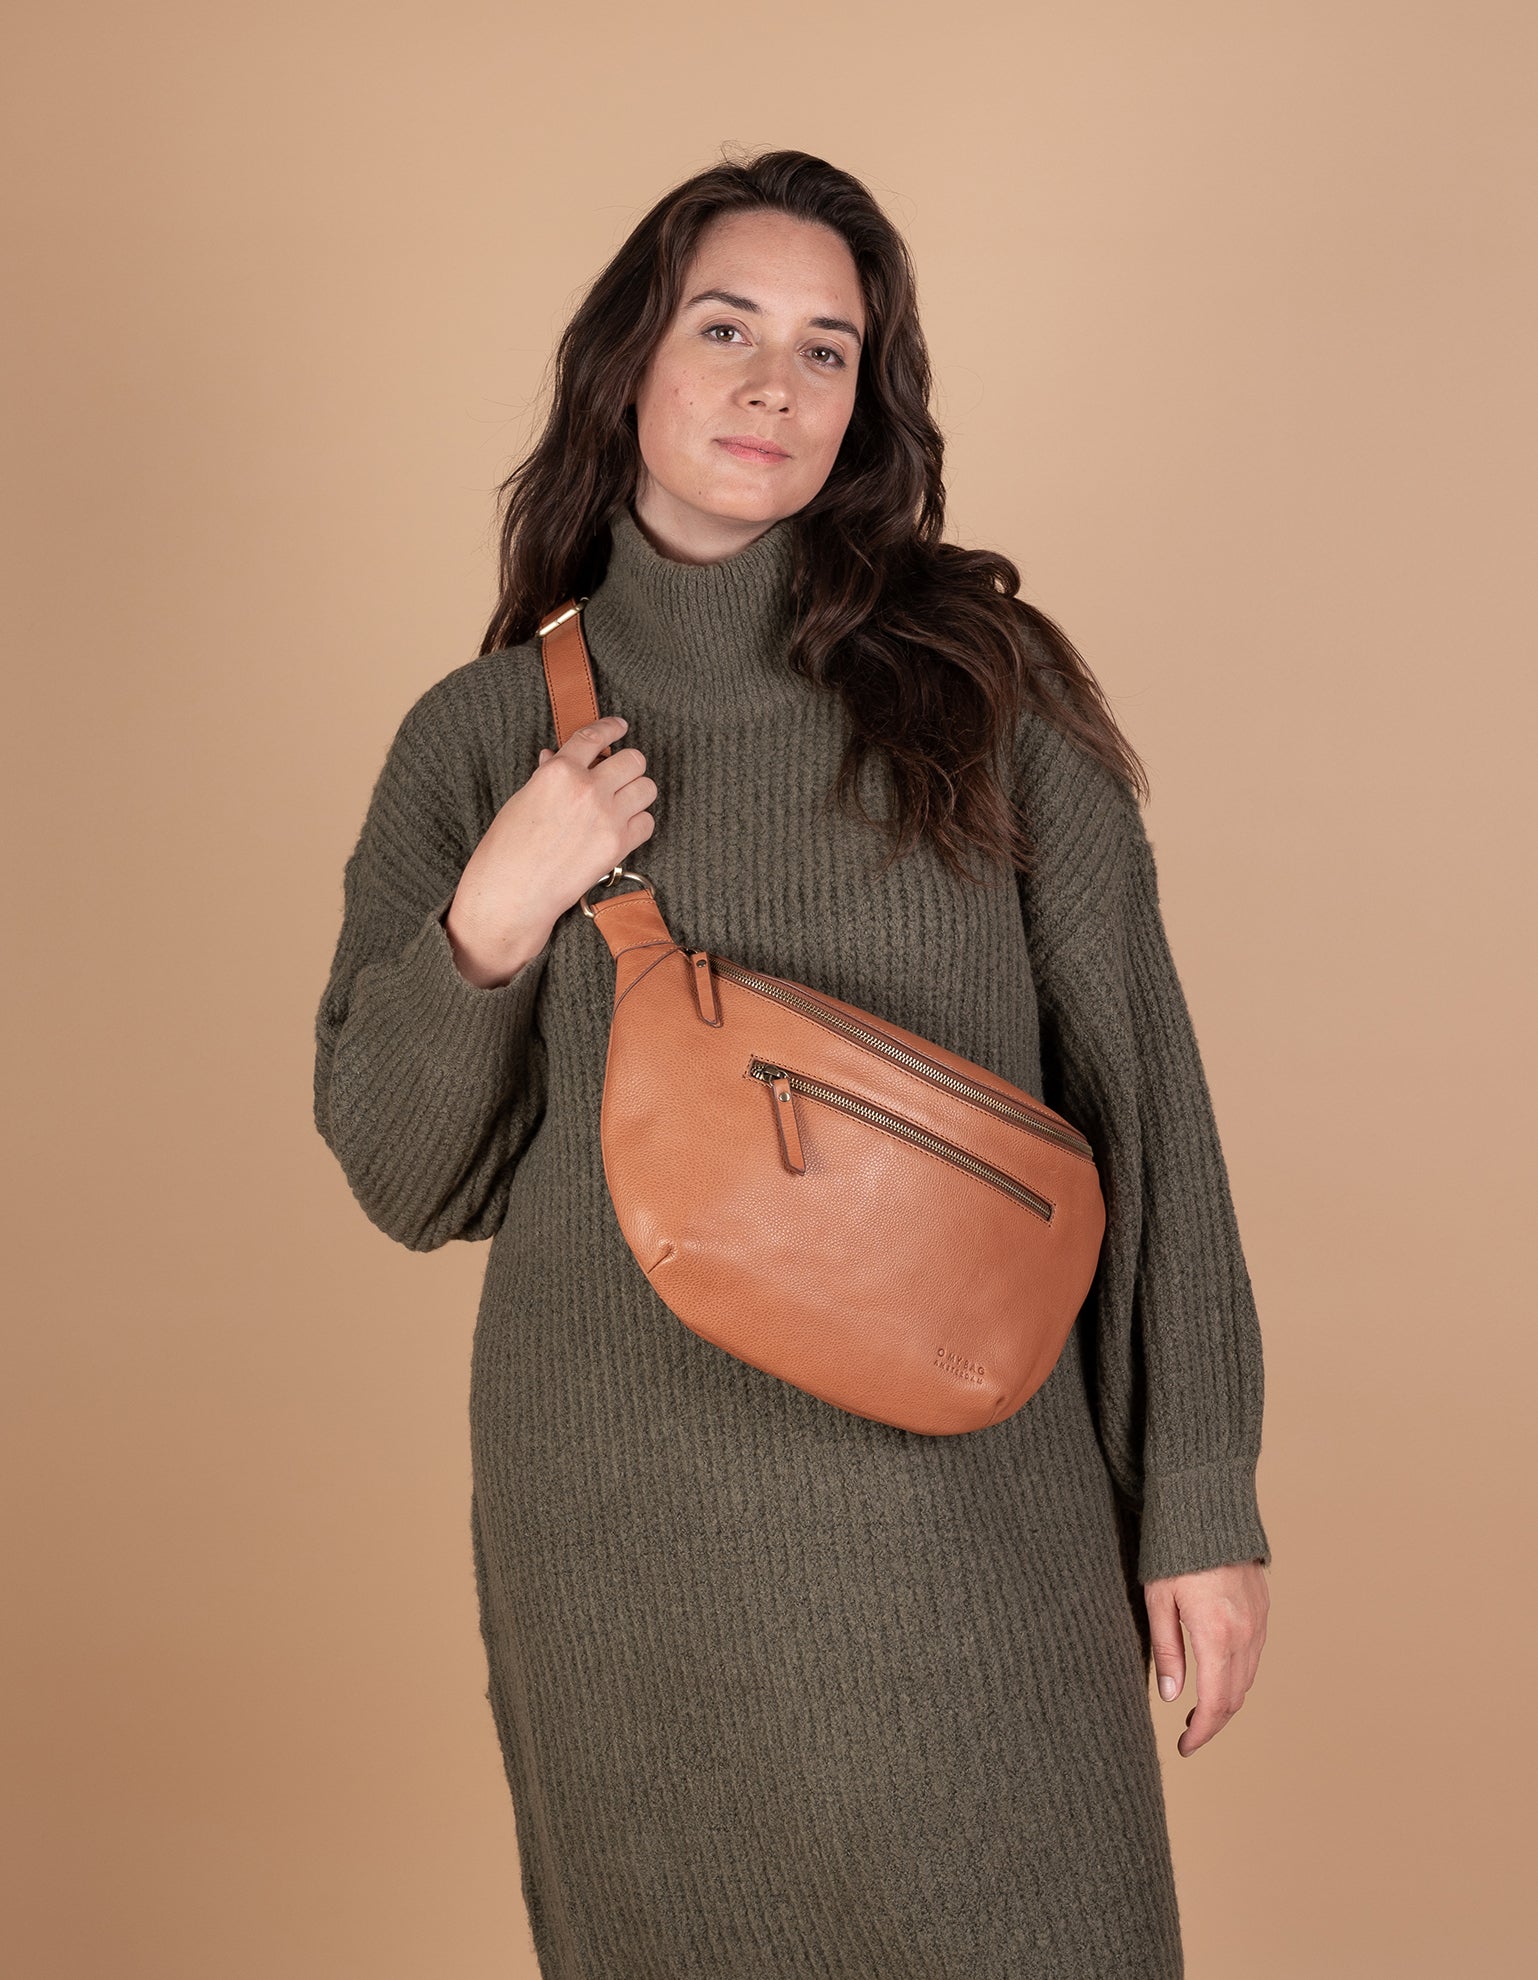 Drew Maxi in wild oak leather ft. adjustable leather strap. Female model product image.